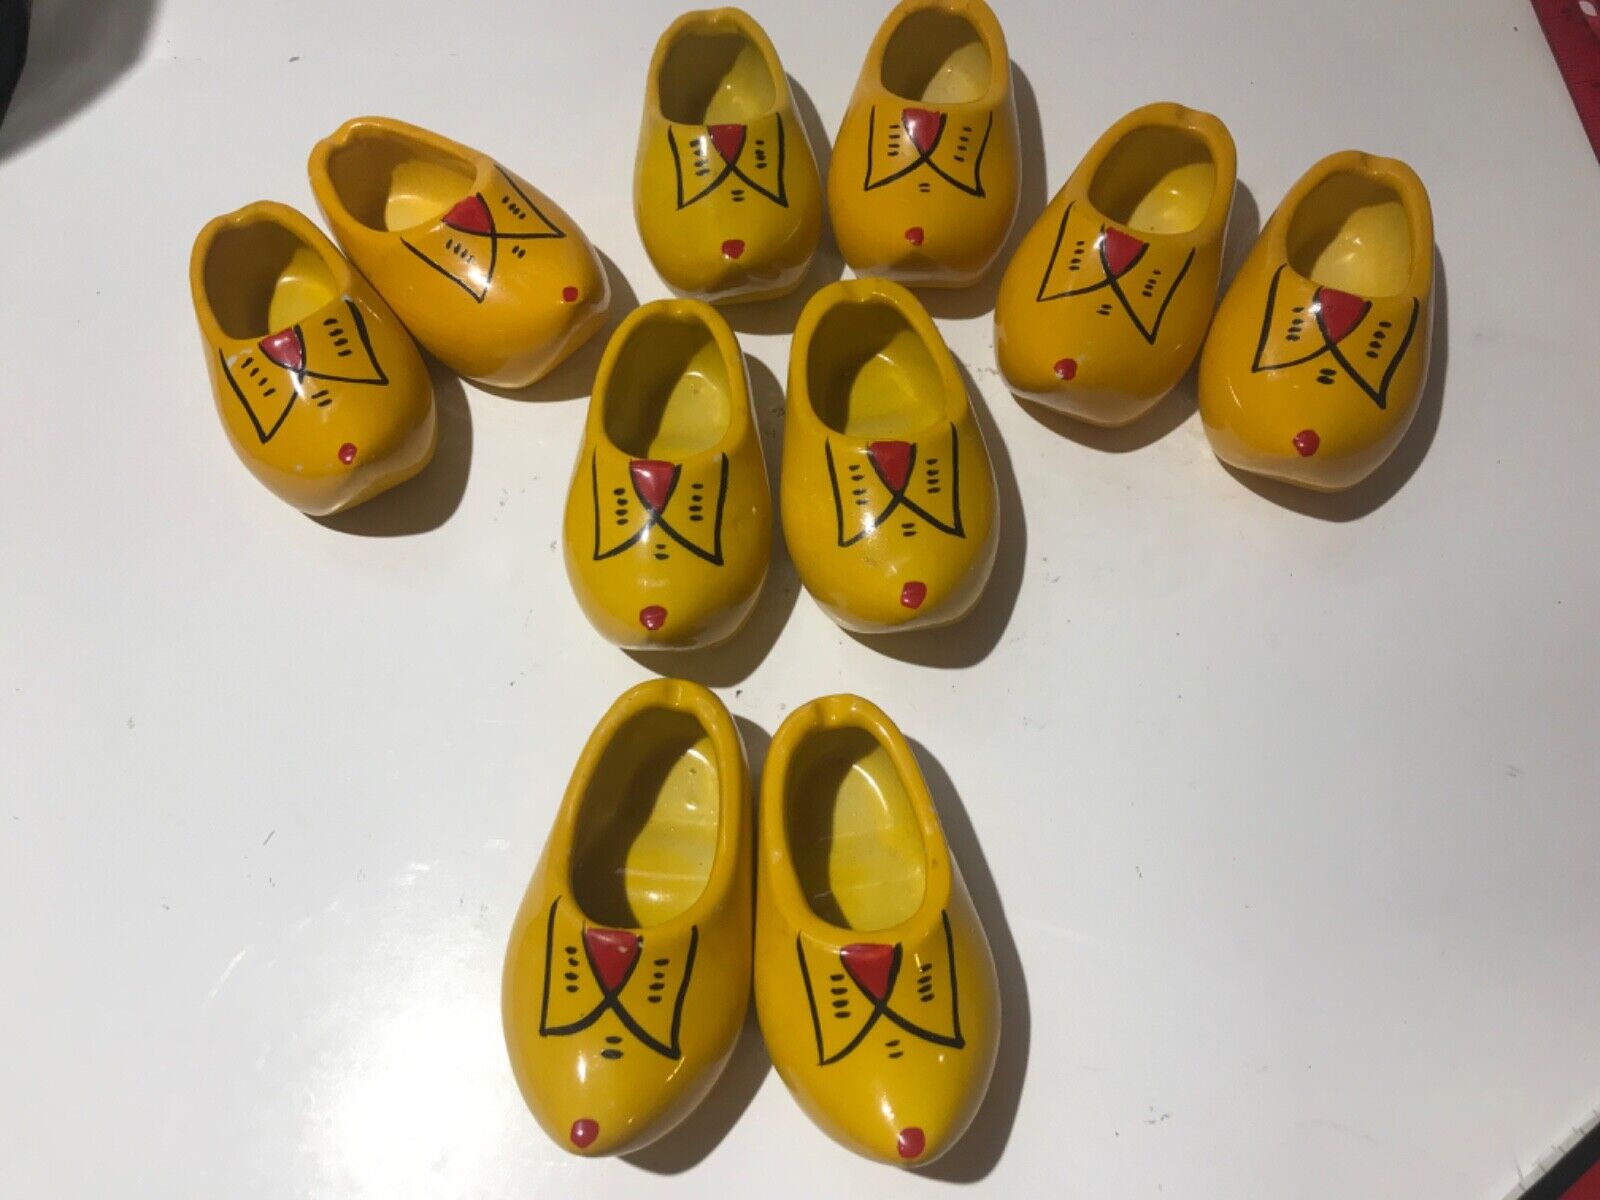 5 Pairs Of Miniature Ceramic Clogs - Most Likely Vintage Souveniers